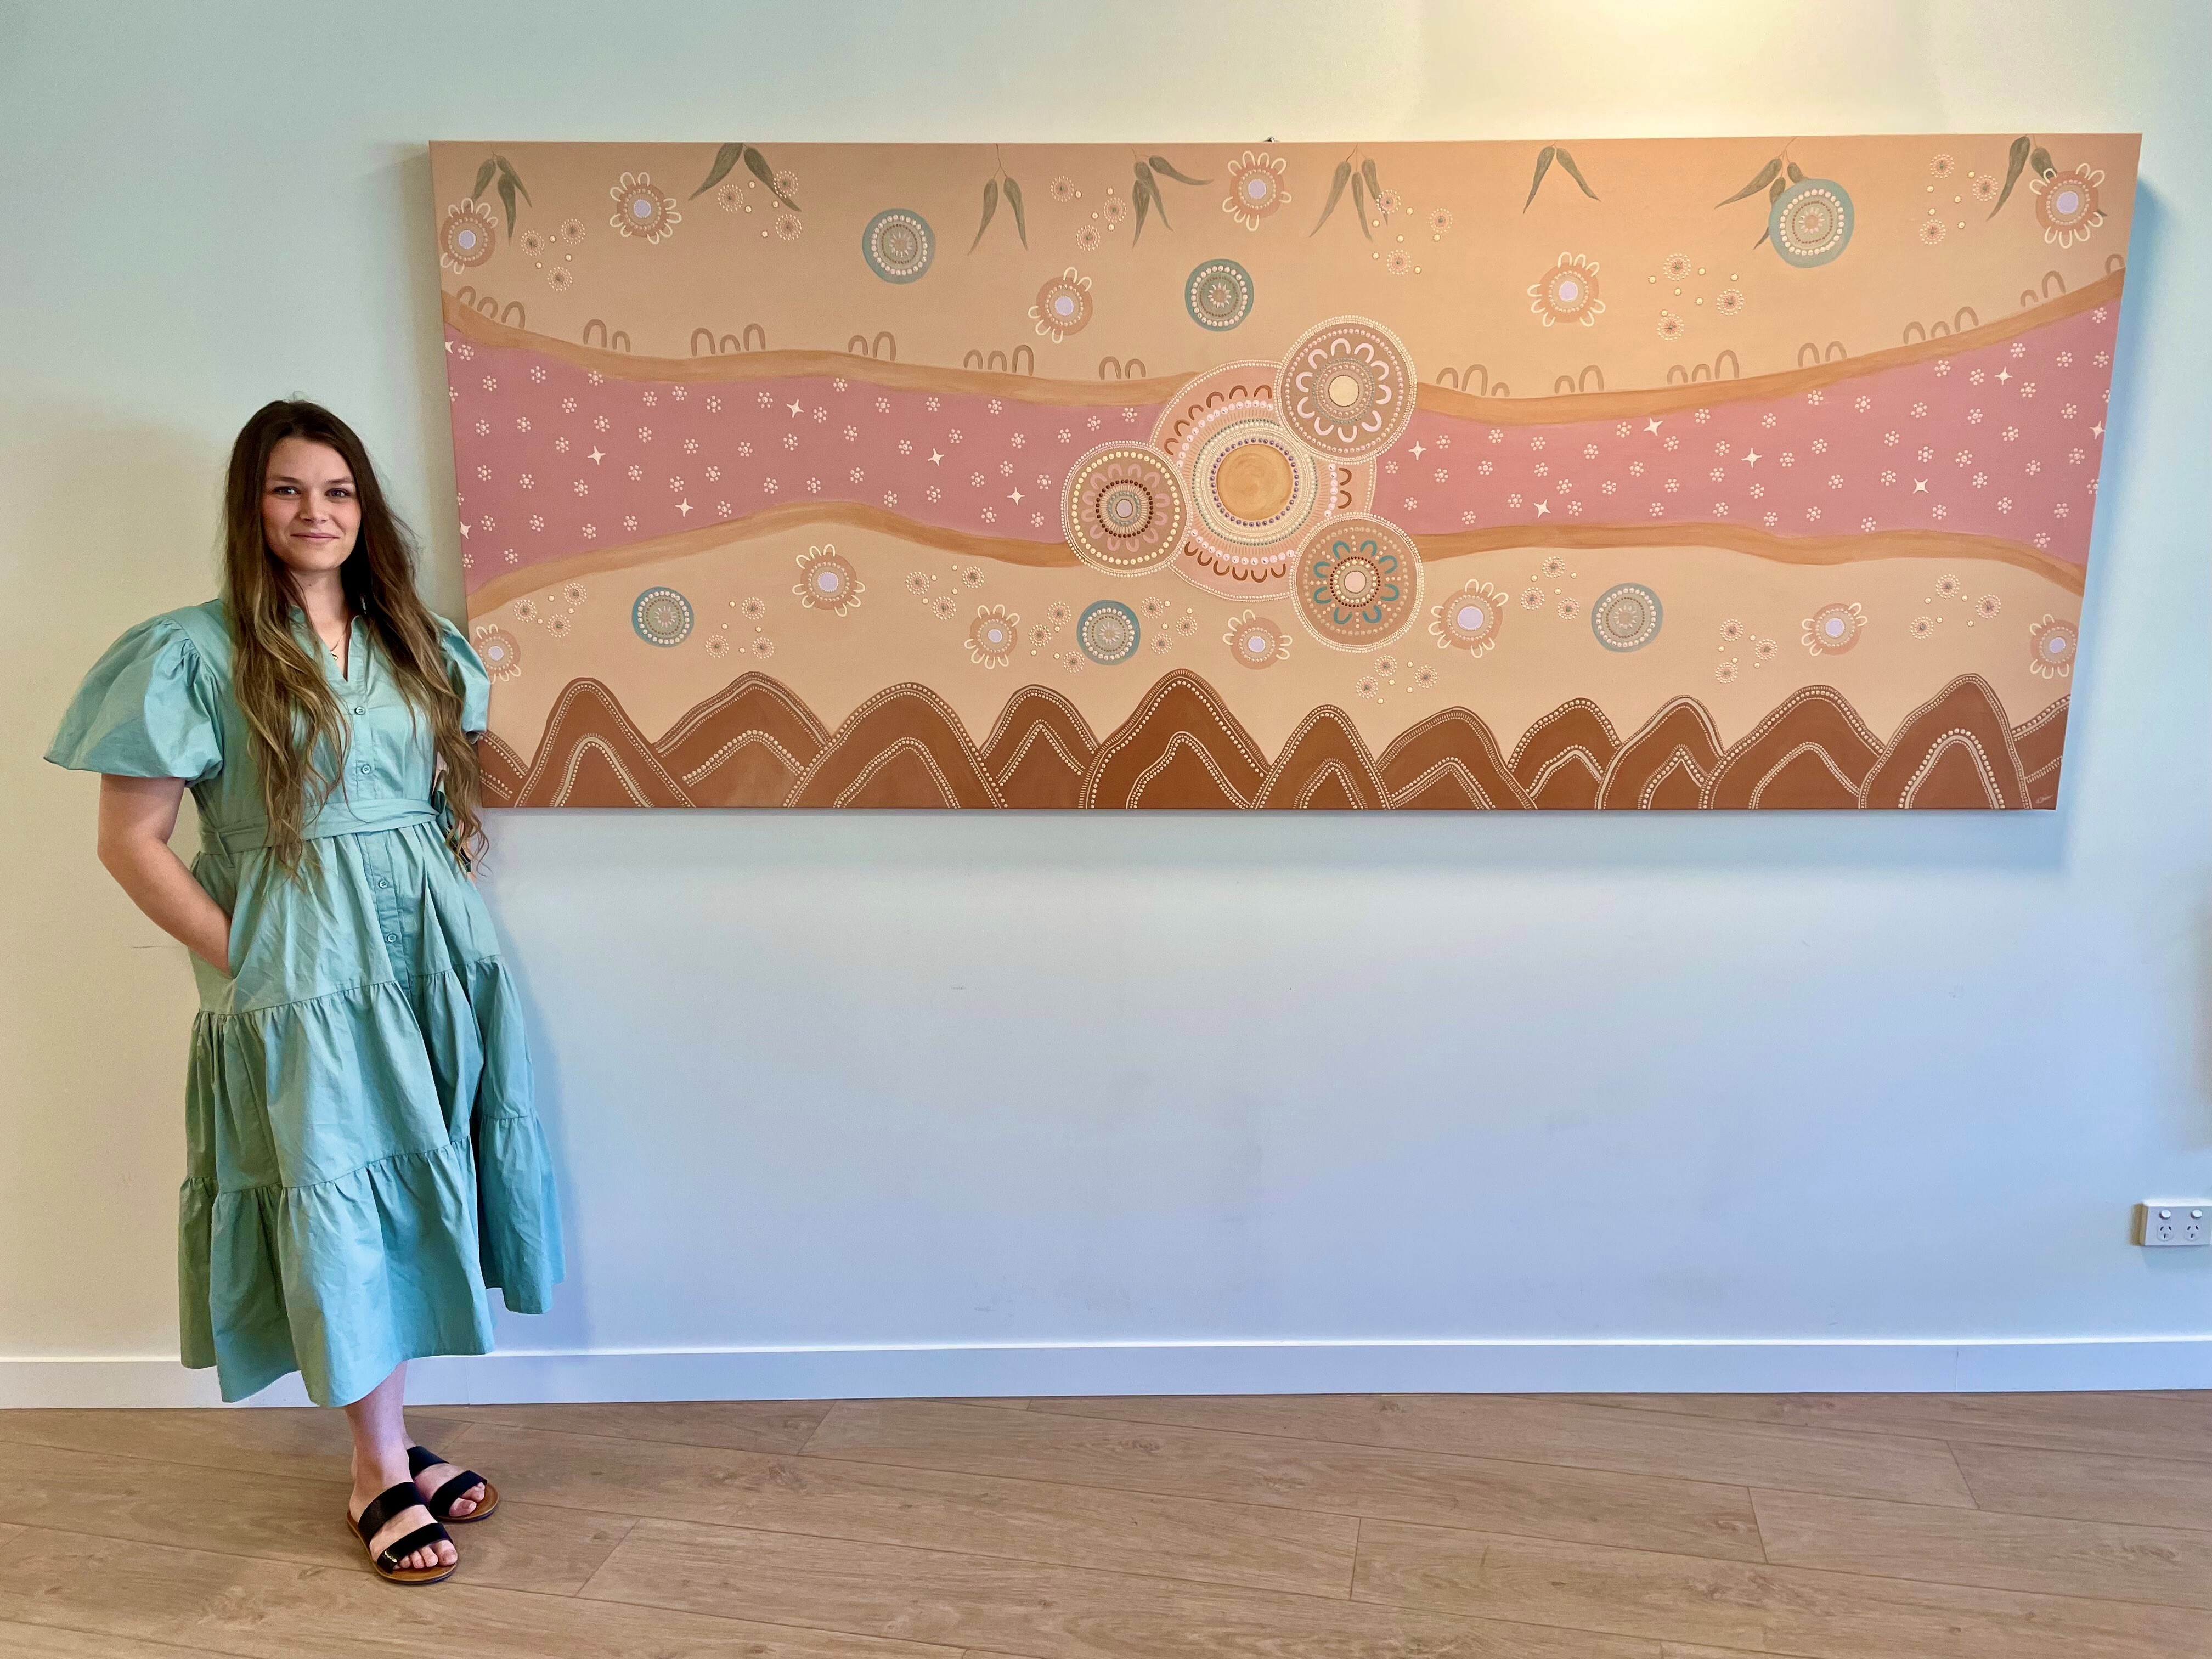 Artist Kyralee Shields pictured with her artwork